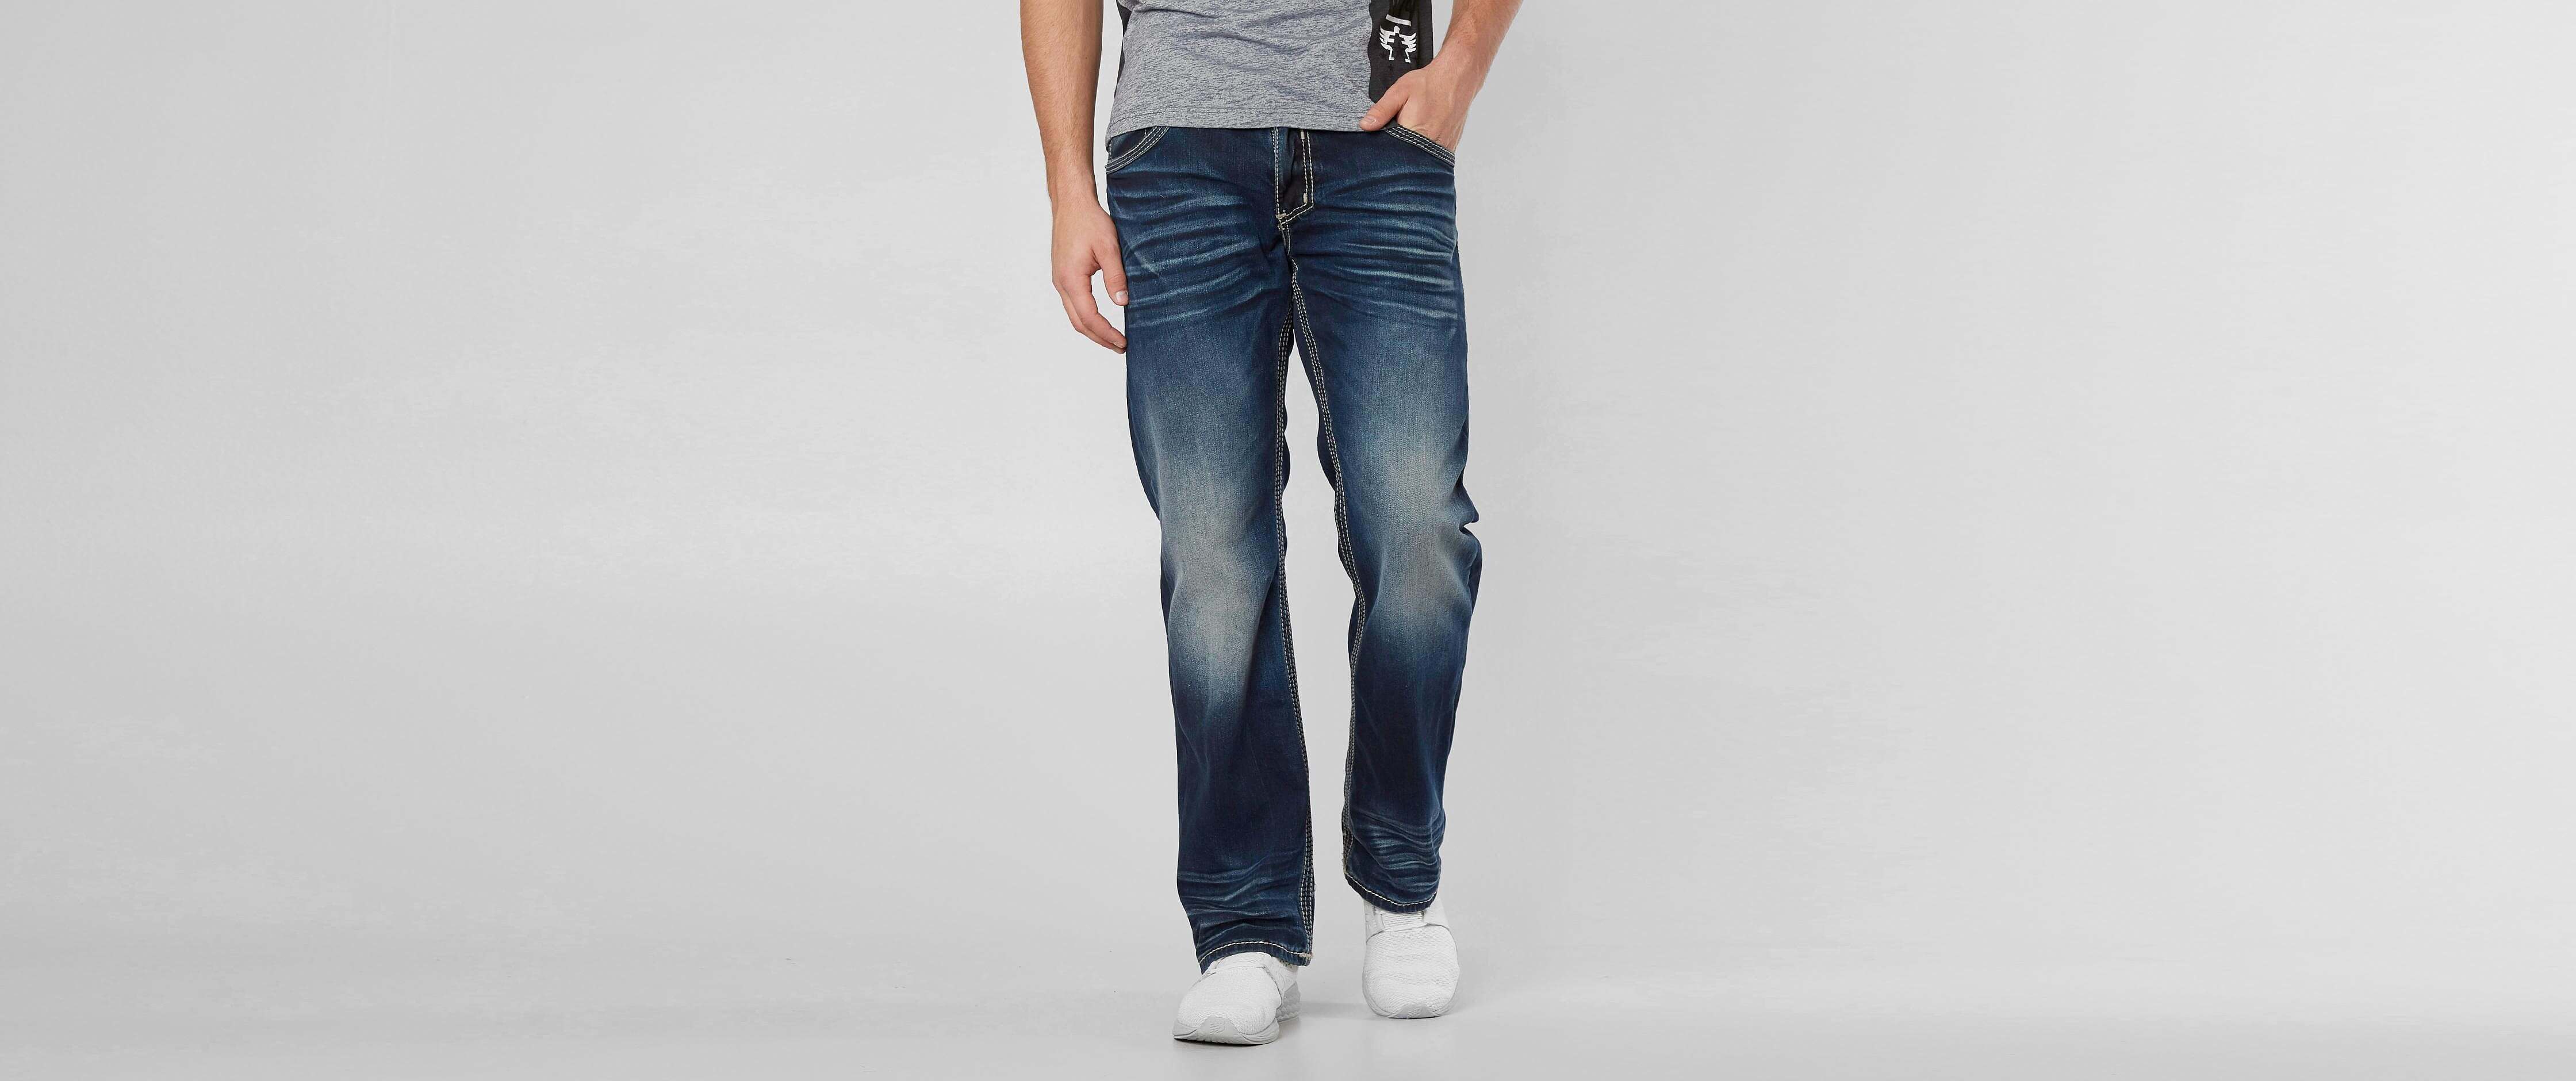 american fighter jeans mens